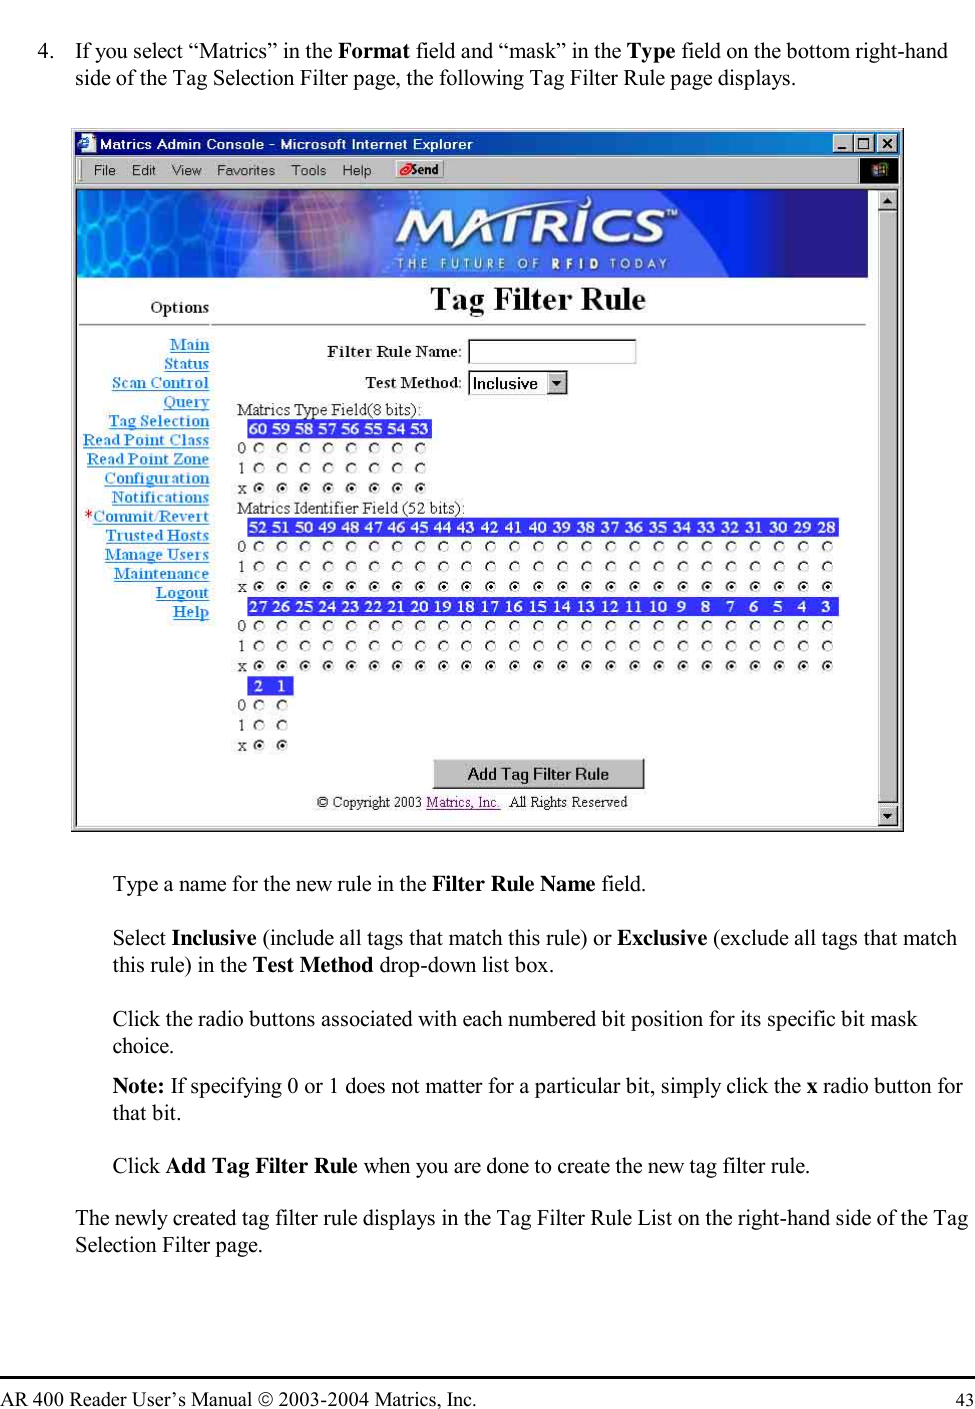   AR 400 Reader User’s Manual  2003-2004 Matrics, Inc.  43 4.  If you select “Matrics” in the Format field and “mask” in the Type field on the bottom right-hand side of the Tag Selection Filter page, the following Tag Filter Rule page displays.     Type a name for the new rule in the Filter Rule Name field.   Select Inclusive (include all tags that match this rule) or Exclusive (exclude all tags that match this rule) in the Test Method drop-down list box.    Click the radio buttons associated with each numbered bit position for its specific bit mask choice. Note: If specifying 0 or 1 does not matter for a particular bit, simply click the x radio button for that bit.   Click Add Tag Filter Rule when you are done to create the new tag filter rule. The newly created tag filter rule displays in the Tag Filter Rule List on the right-hand side of the Tag Selection Filter page. 